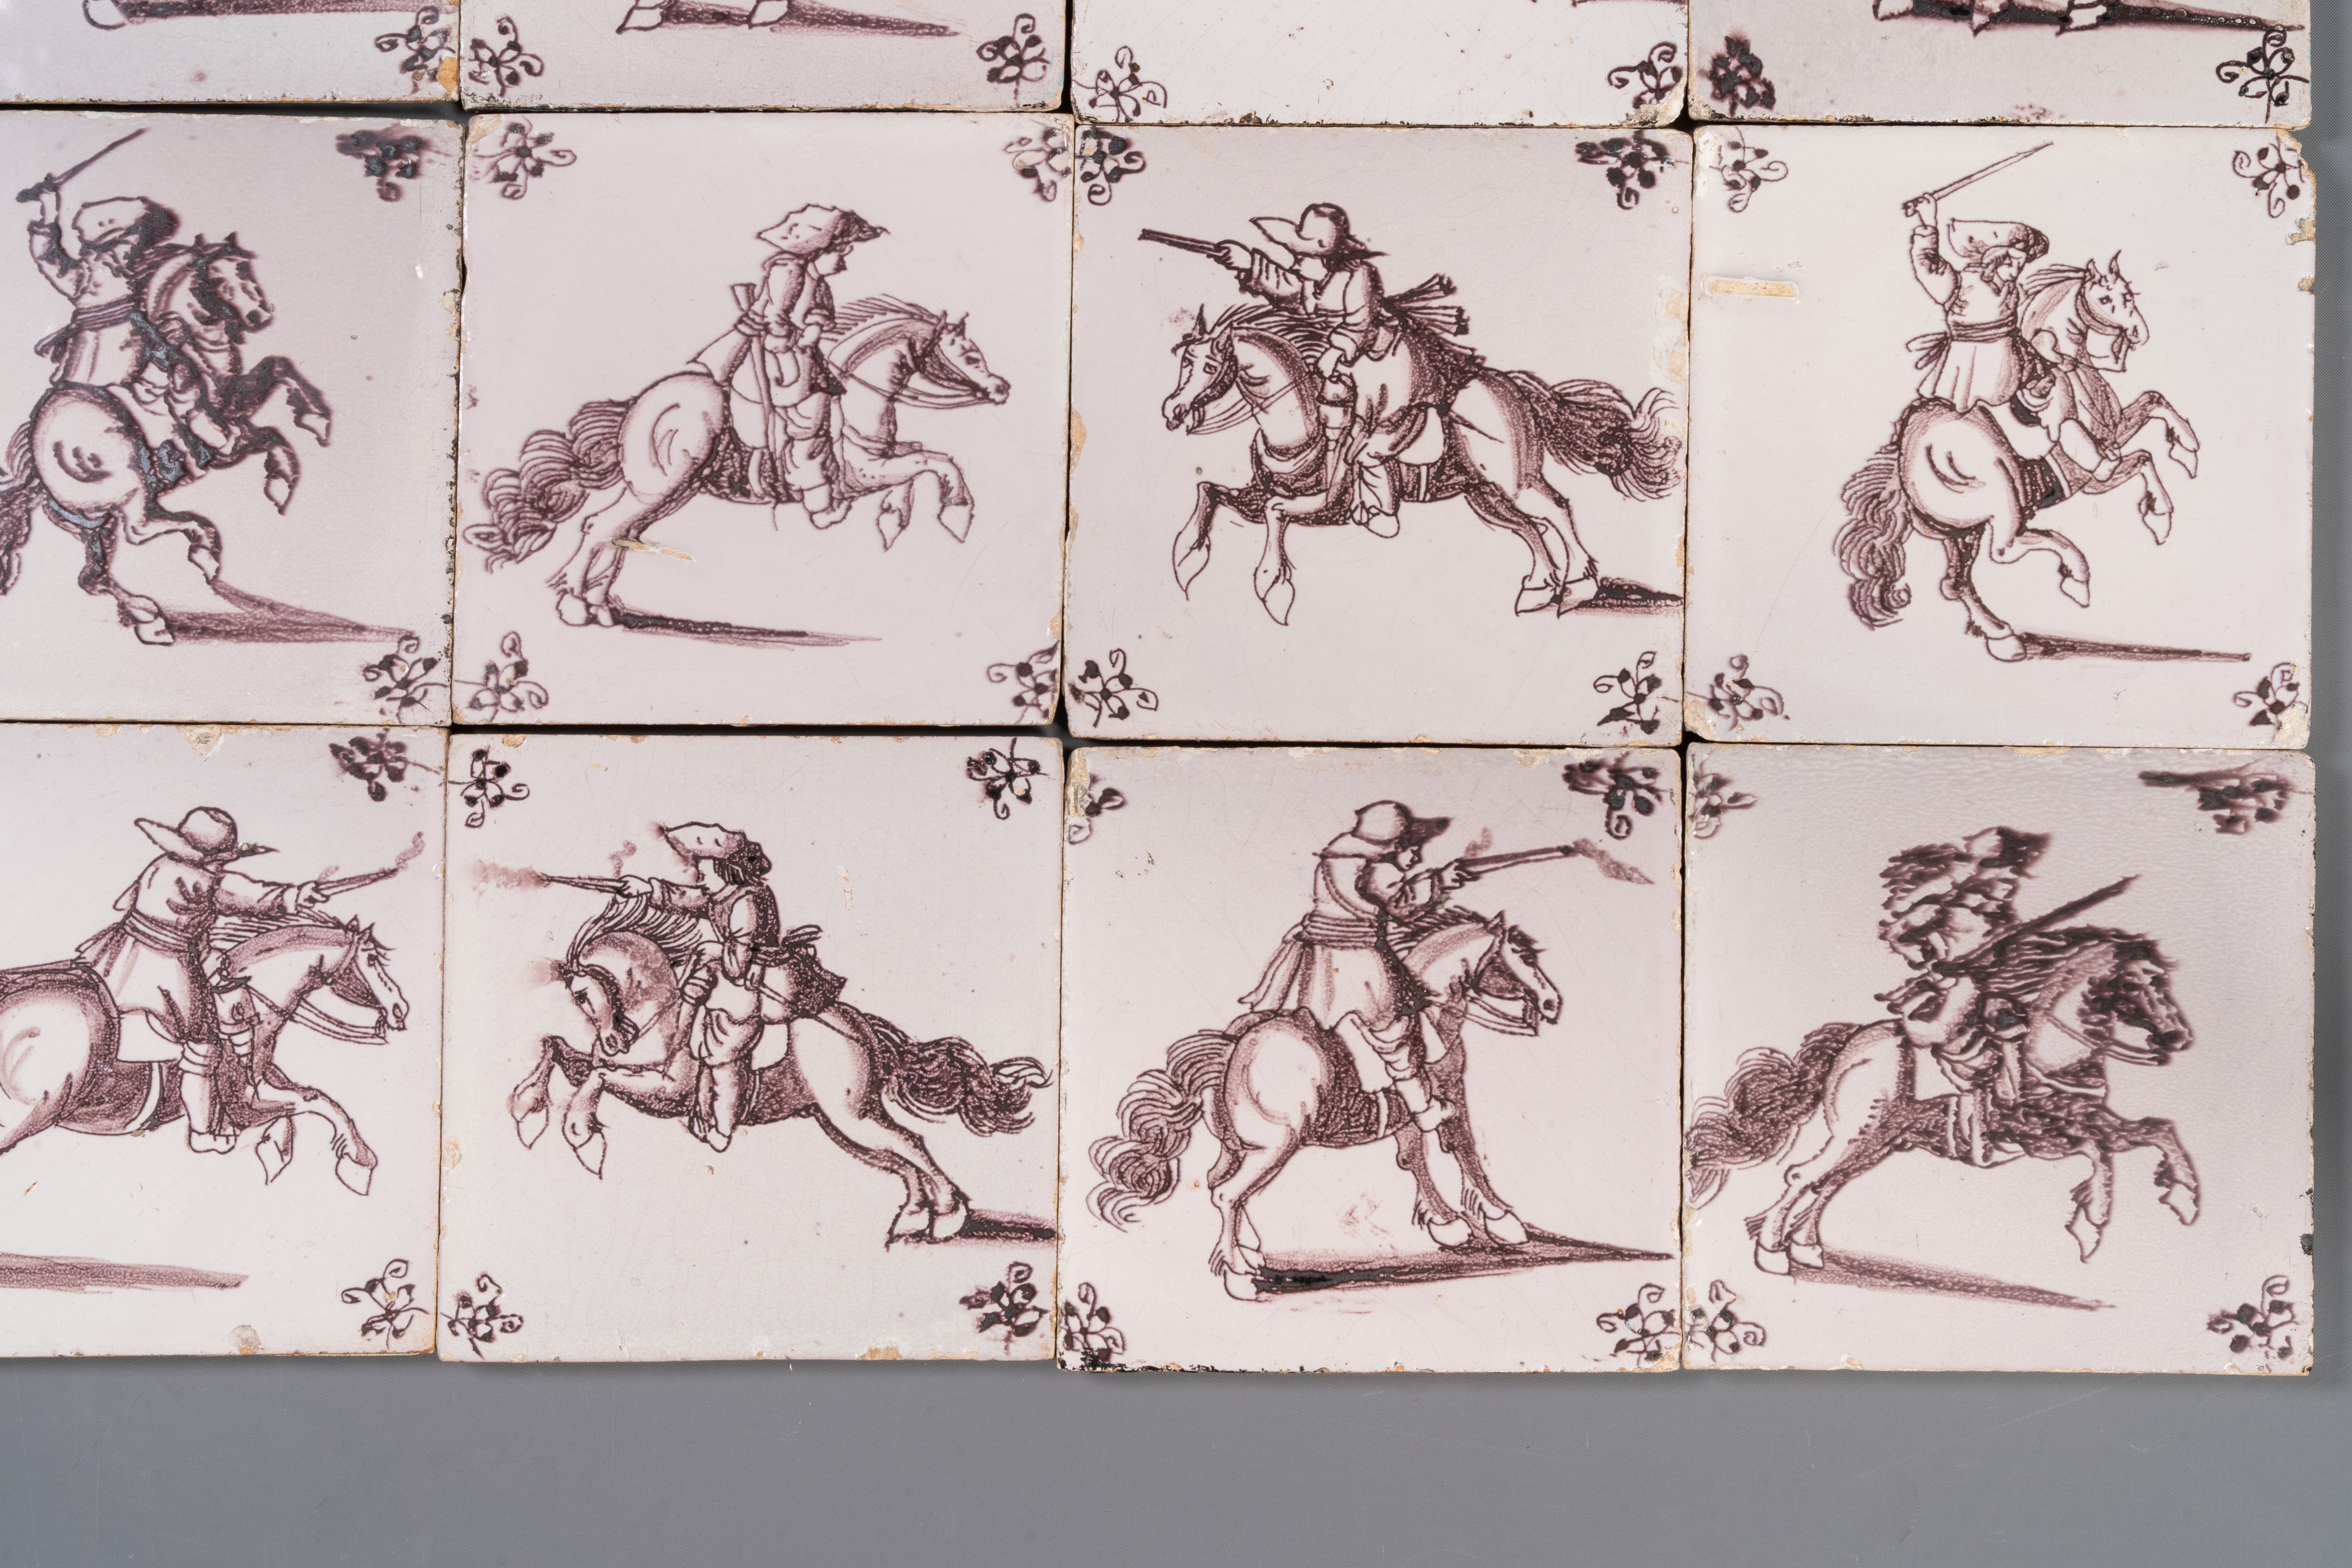 Fifteen Dutch Delft manganese tiles with horse riders, late 17th C. - Image 10 of 13